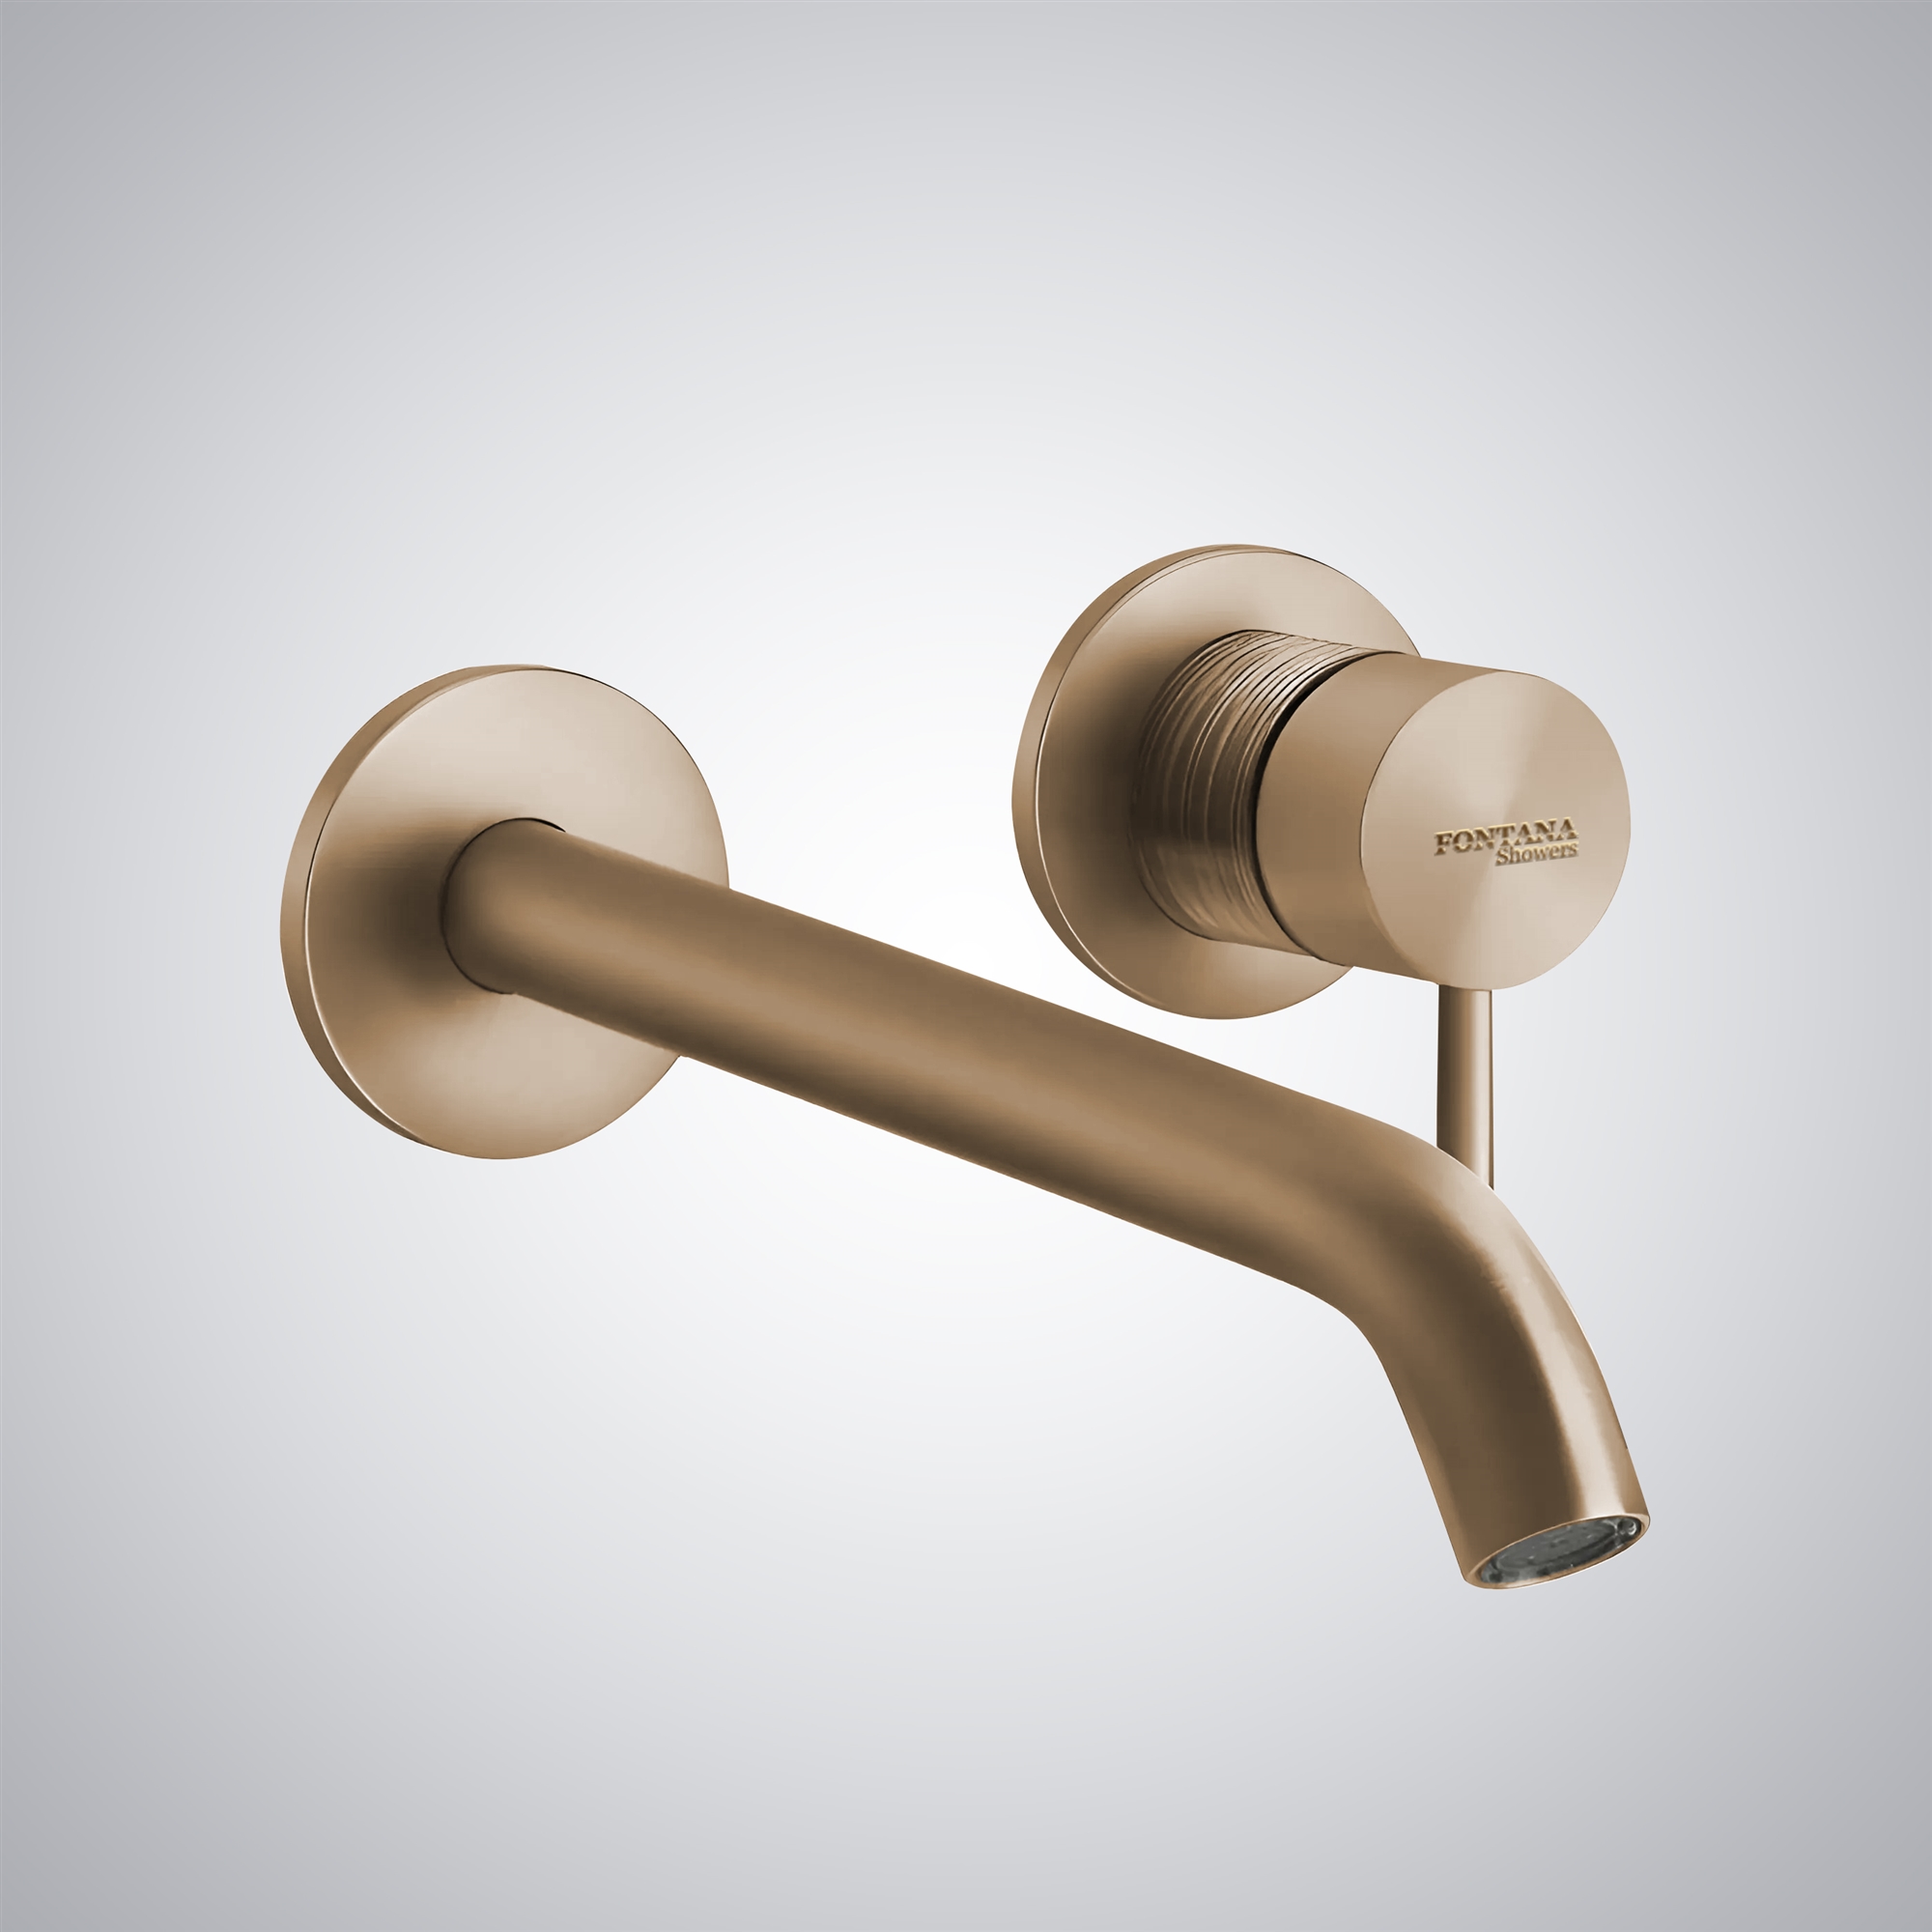 Fontana Wall-Mounted Faucet in Warm Bronze Brushed Finish Equipped with Round Pin Wall Mixer